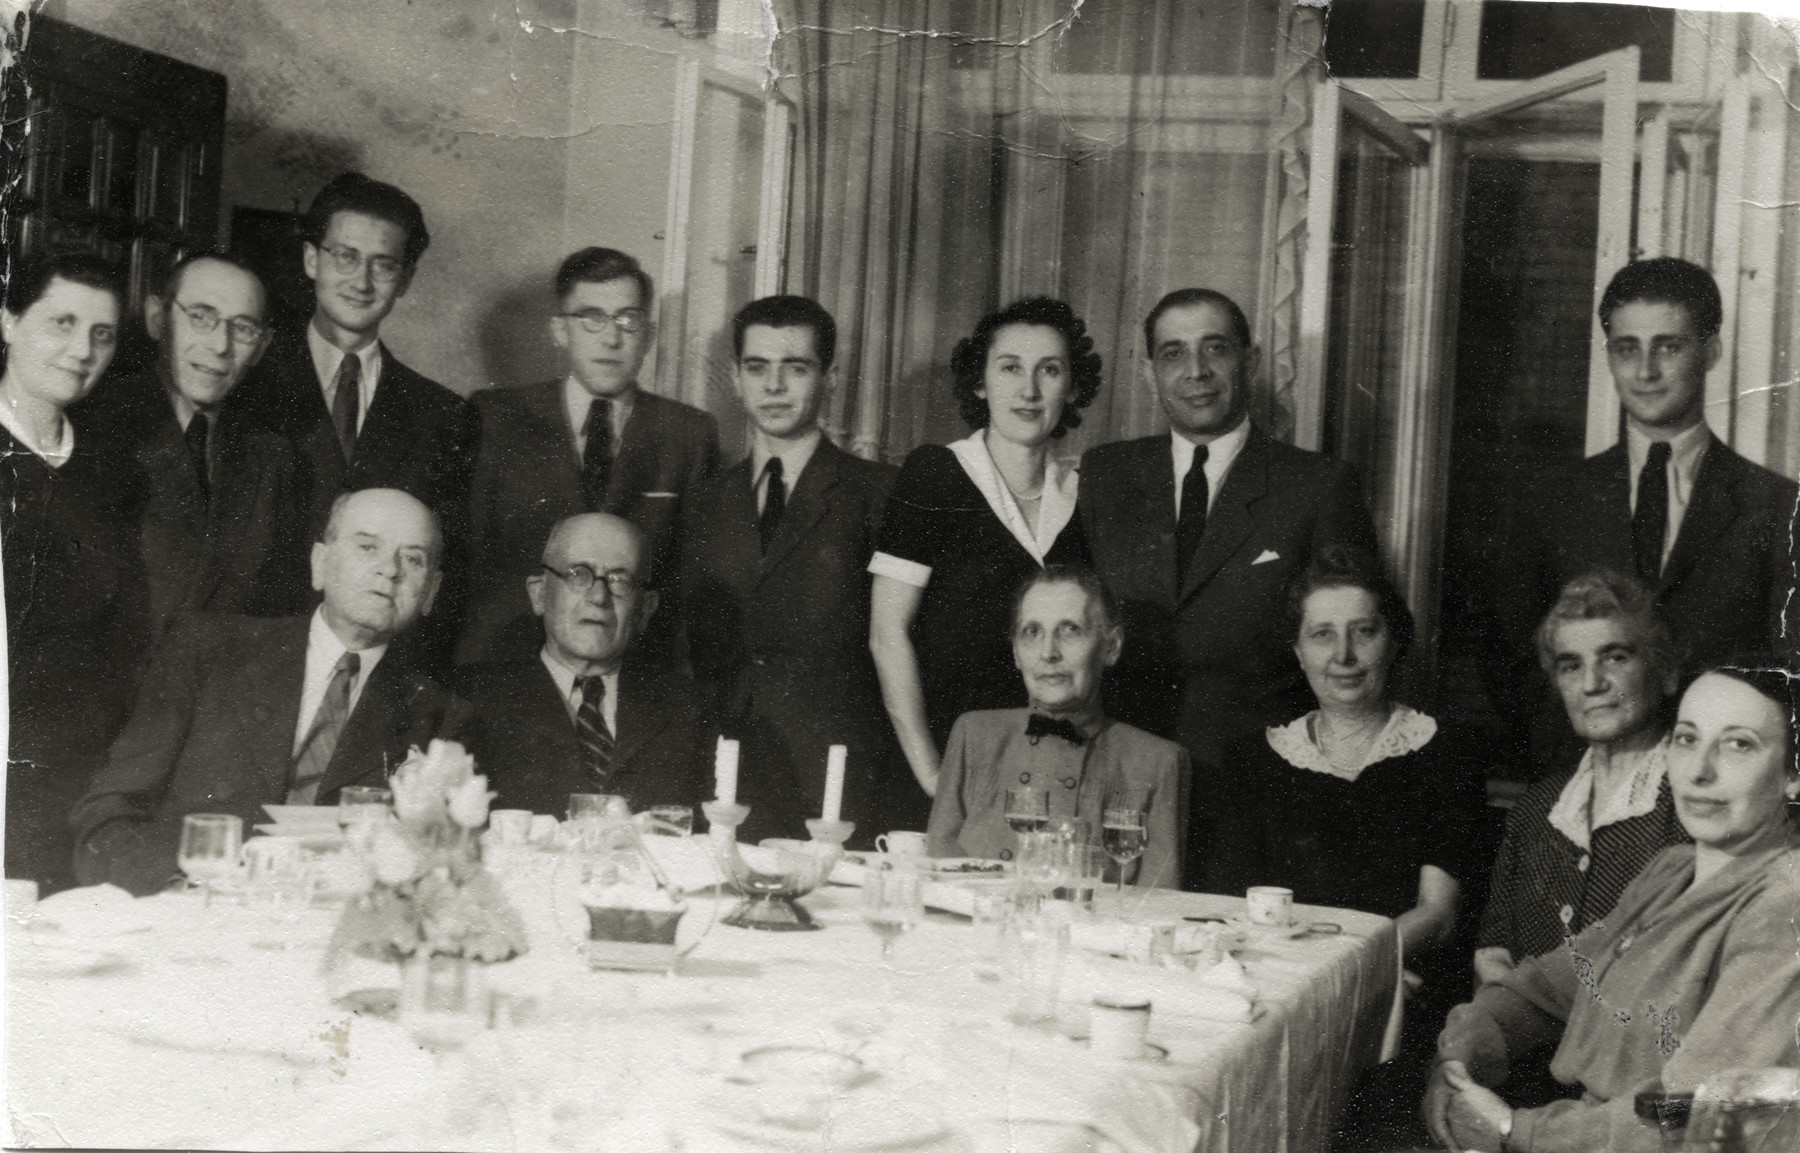 The Bisseliches family gathers for a Passover seder.

Among those pictured are Moses and Franciska Bisseliches and their sons Daniel and David.